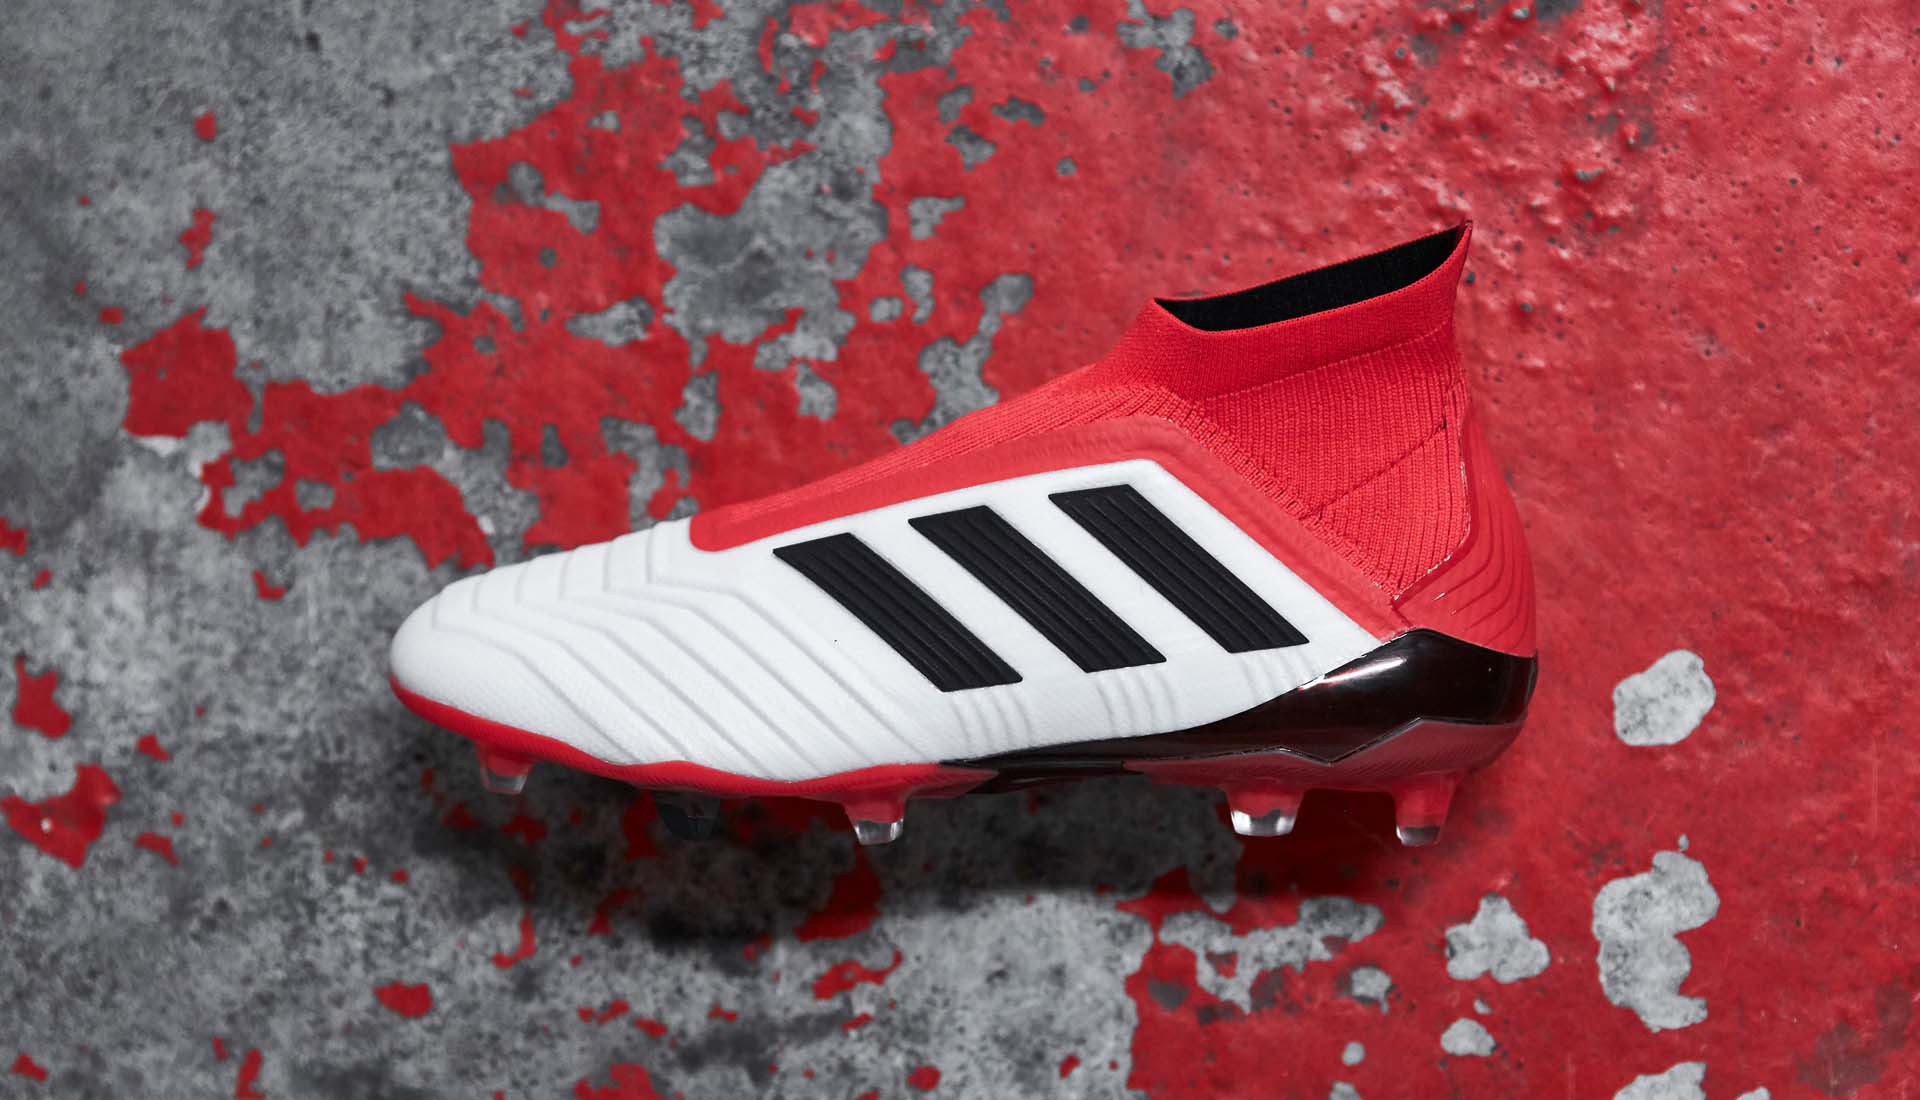 Adidas Soccer Shoes Wallpaper Free Adidas Soccer Shoes Background